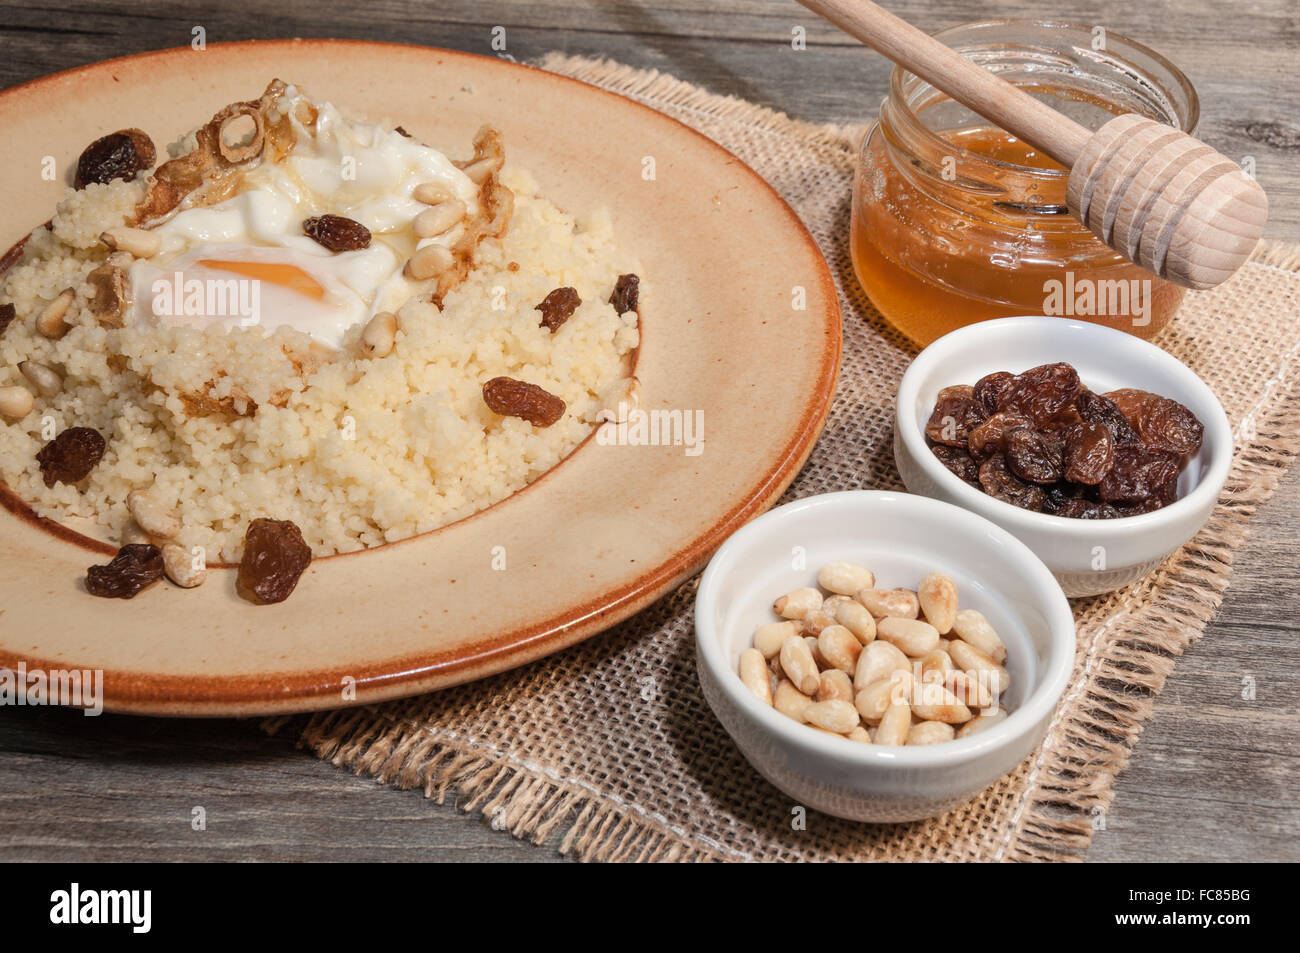 Cous cous with fried egg and honey Stock Photo